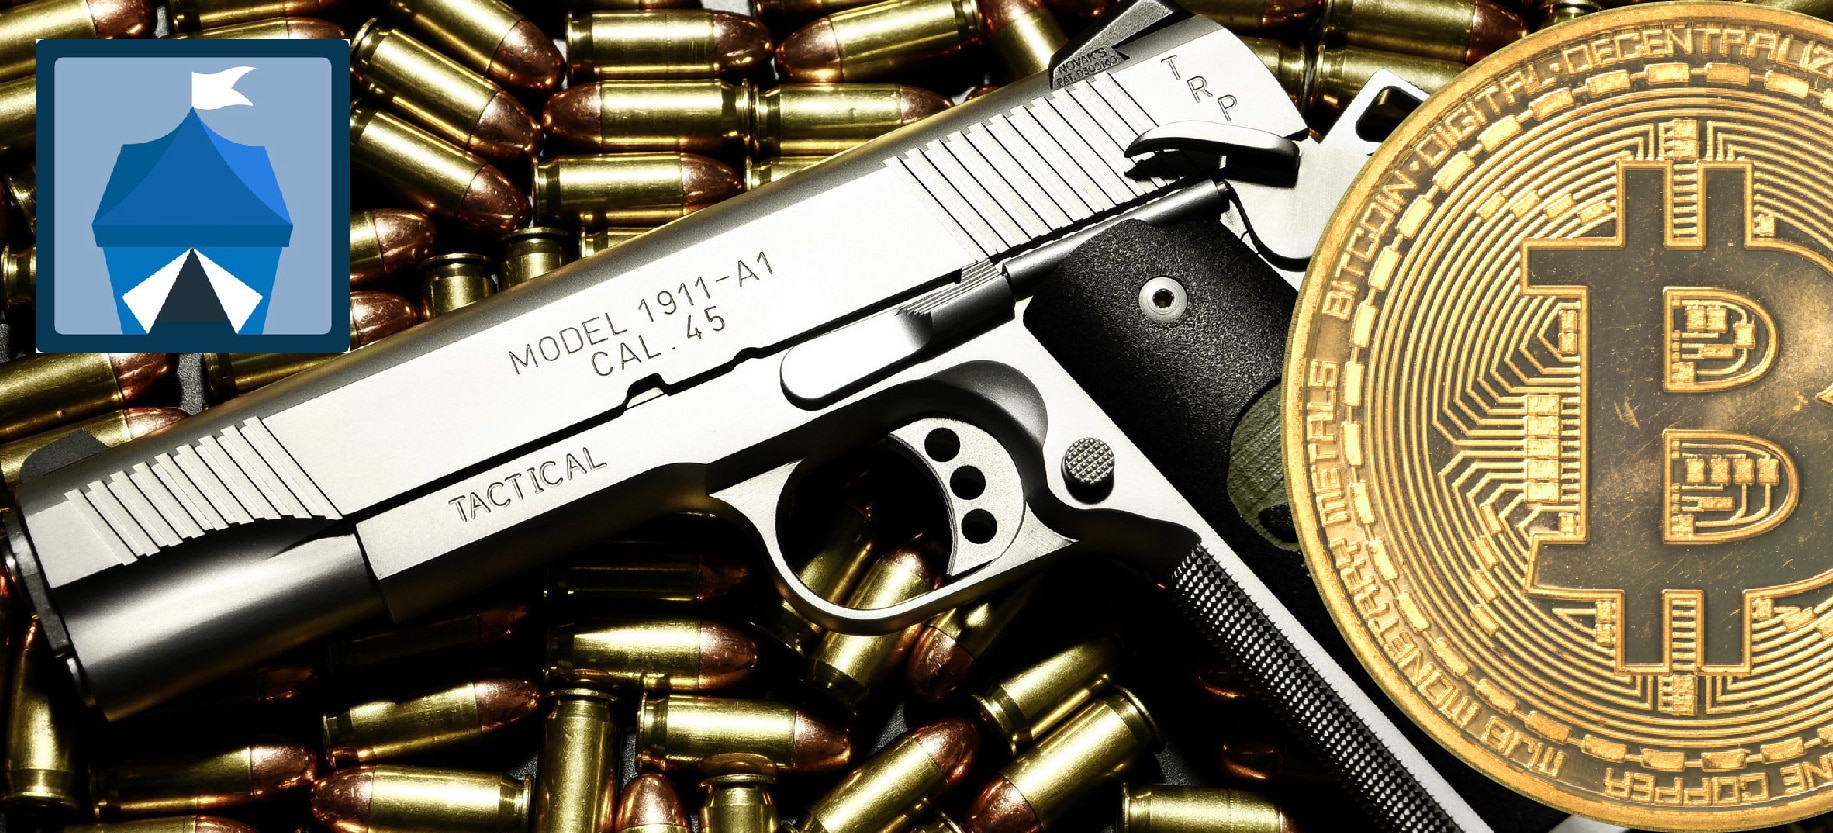 Shopping for Drugs, Fake IDs and Guns Using Bitcoin on OpenBazaar